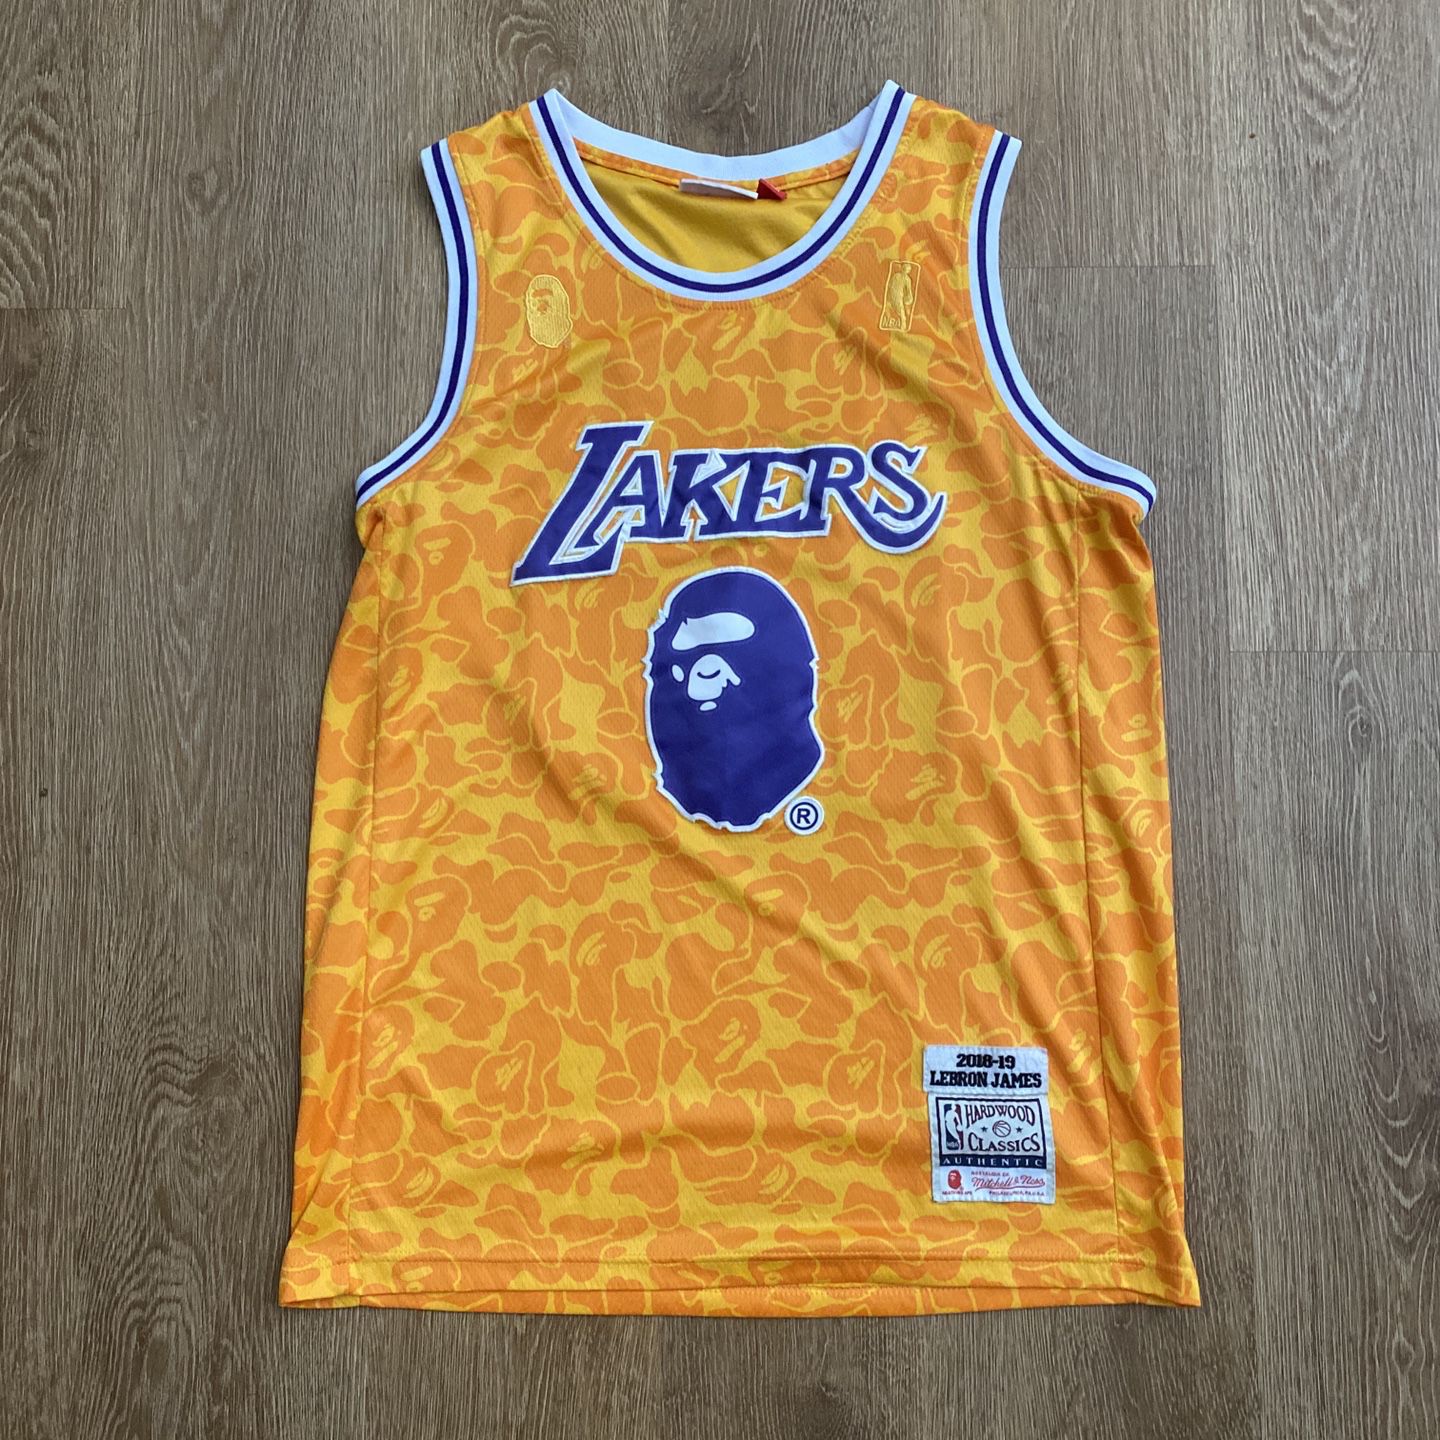 Lakers Bape Jersey for Sale in Moreno Valley, CA - OfferUp